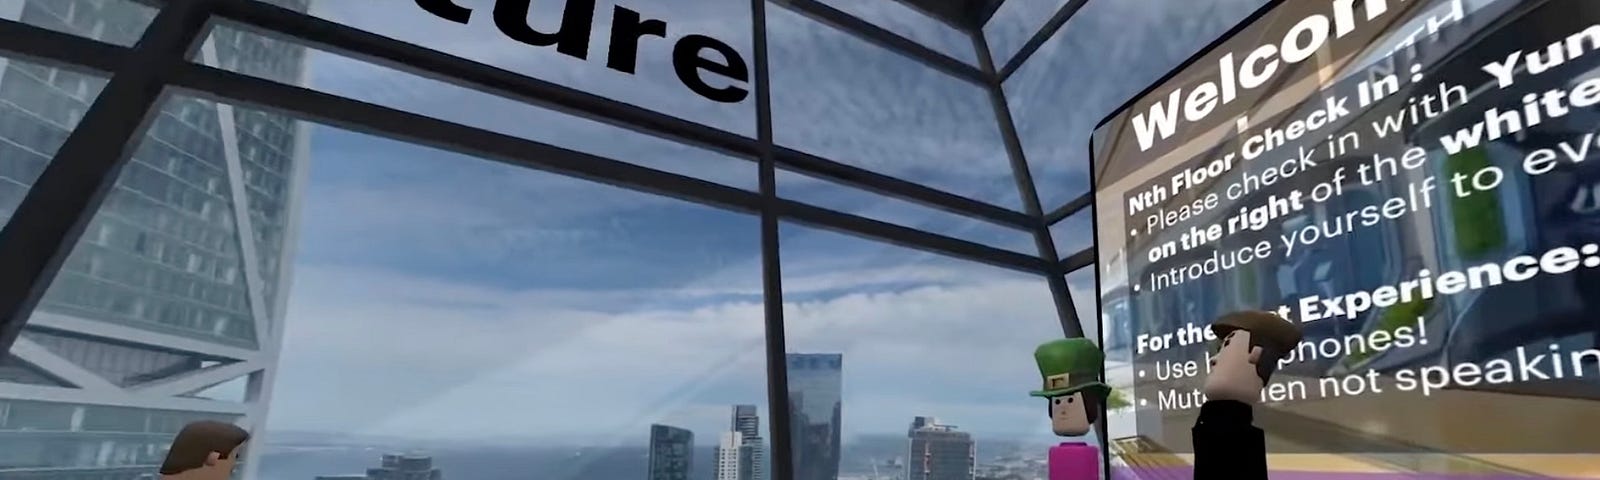 IMAGE: An image from an Acccenture video explaining their metaverse for employees, called “The Nth Floor”.